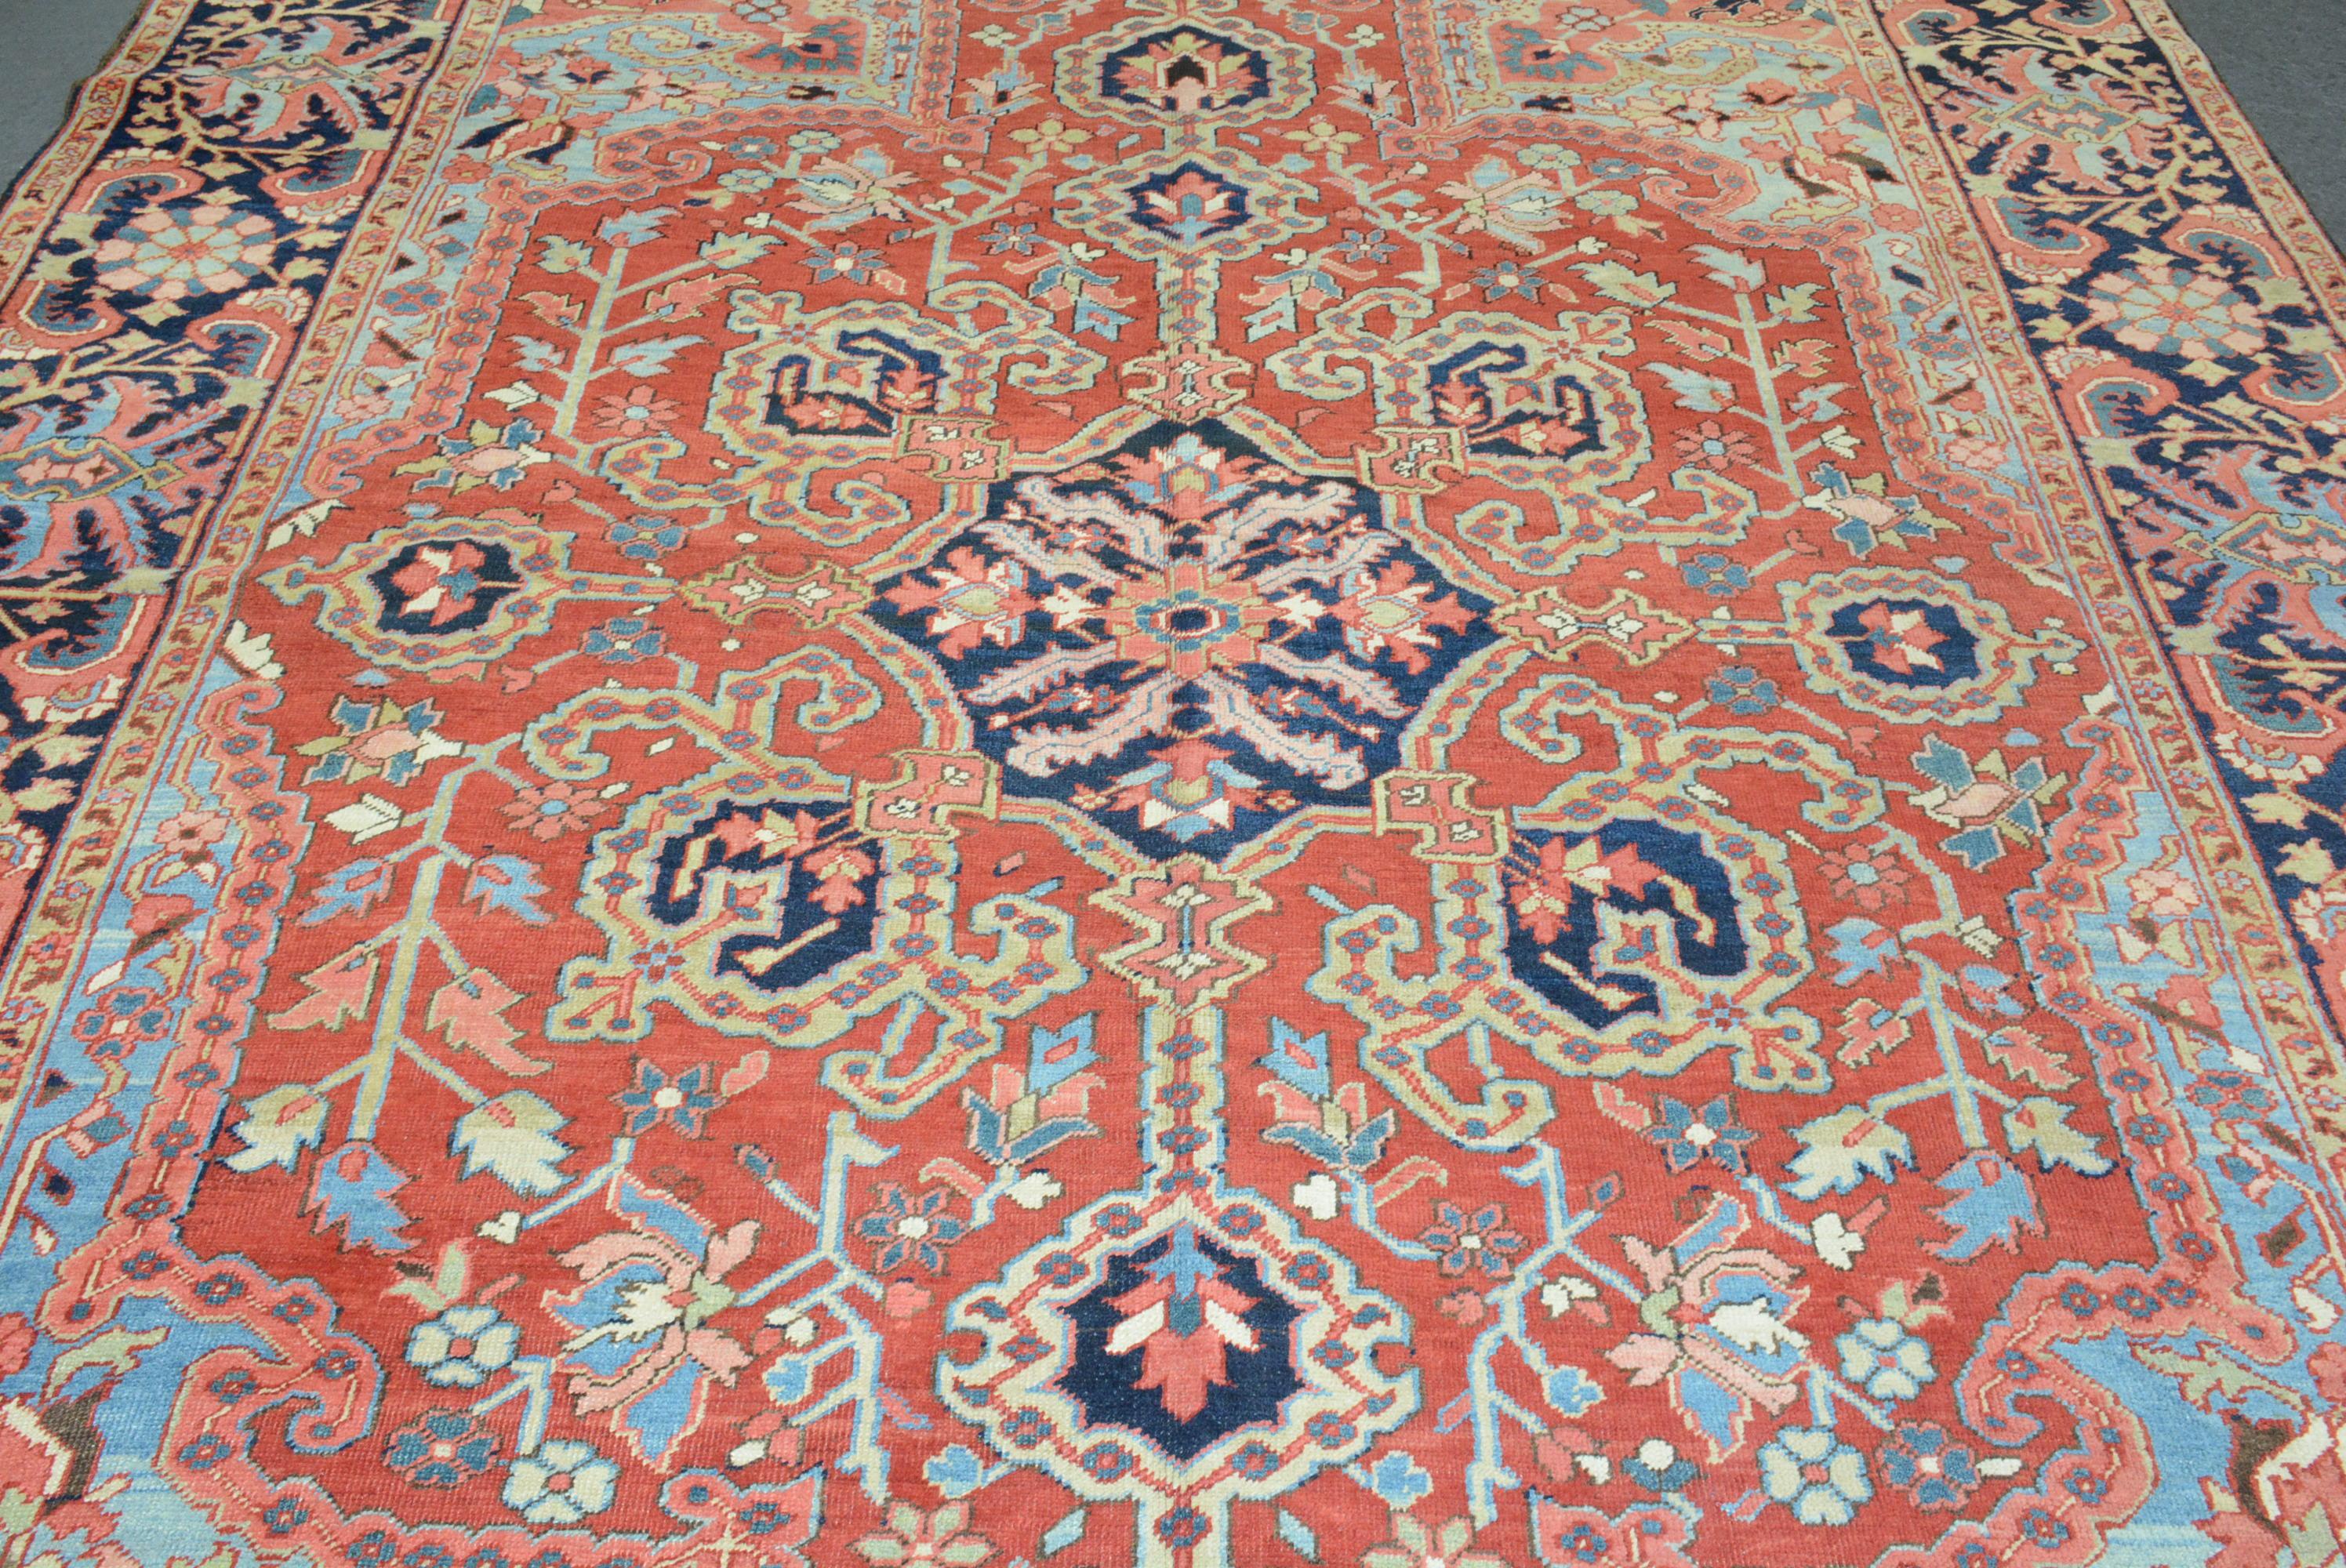 Heriz is a town in northwest Persia (Iran) that has been producing carpets since the 19th century. It is located on Mt. Sabalan, a major source of copper, whose summit is 15,784 feet. The grade of wool used in these carpets is amongst the best, a